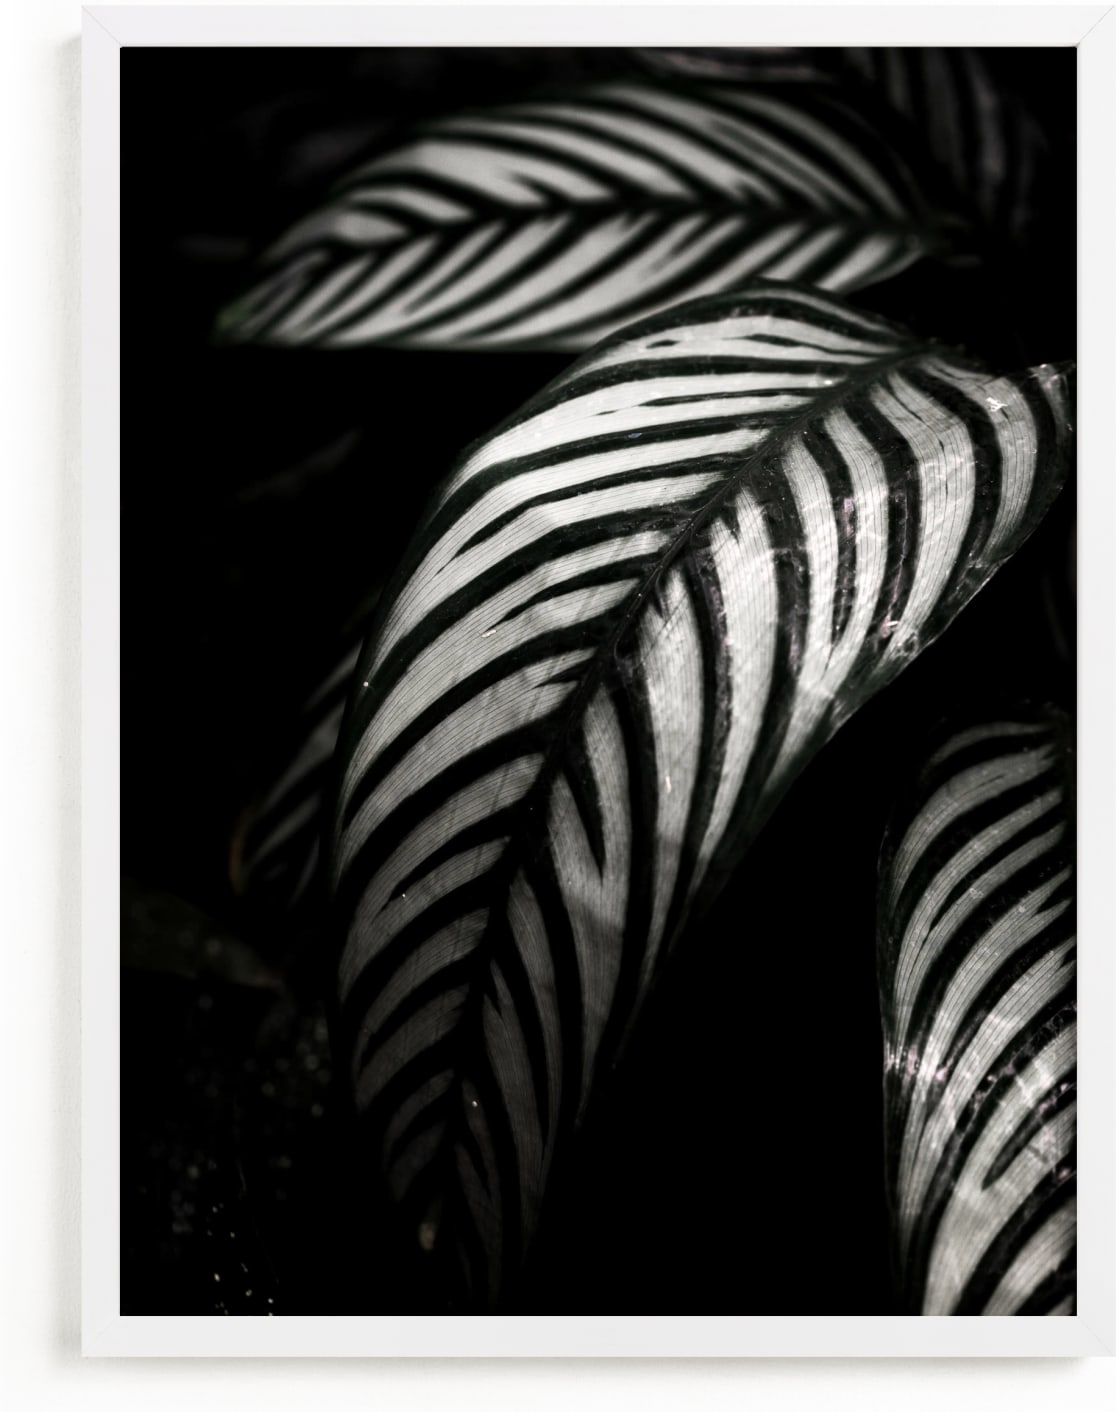 This is a black and white kids wall art by Kaitie Bryant called Botanical Study #10.